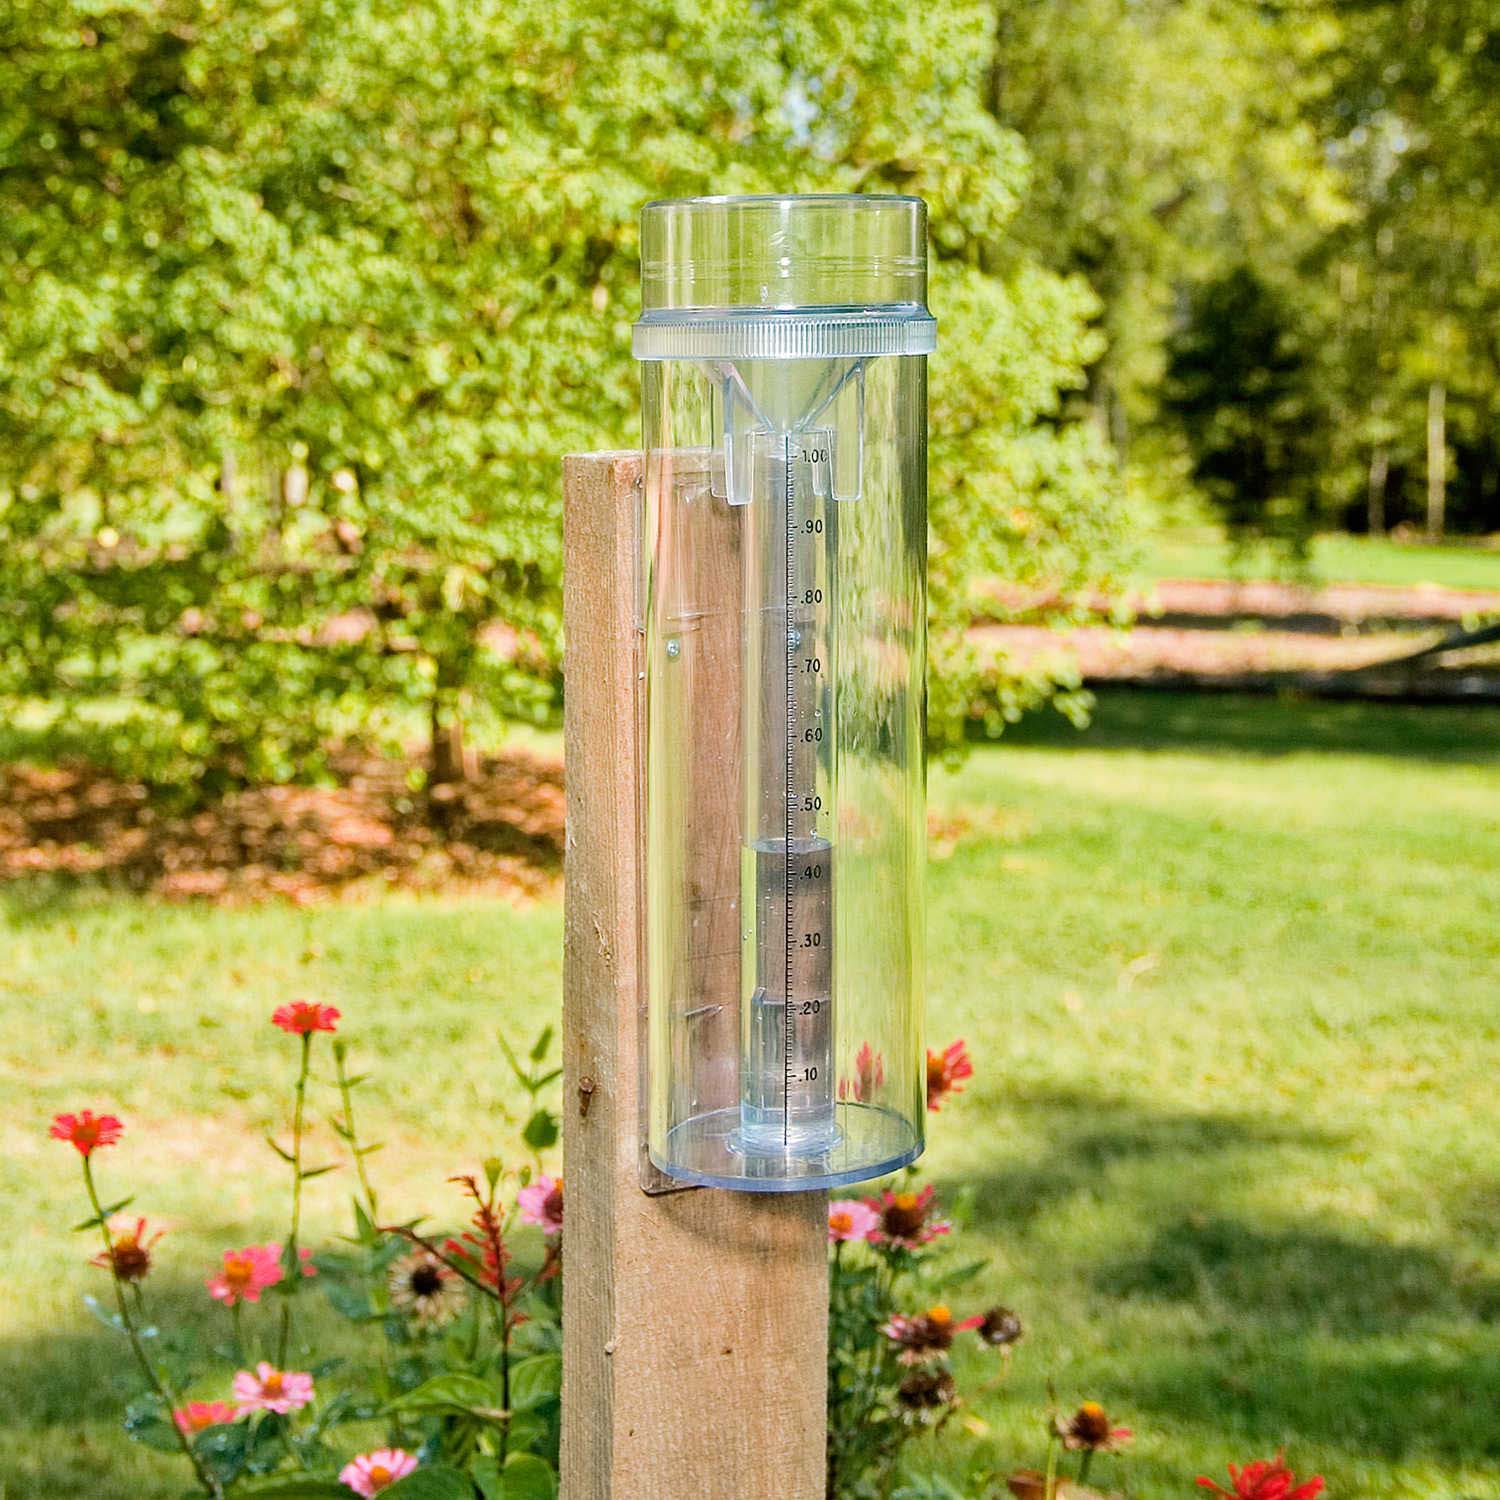 Using a rain gauge for water conservation